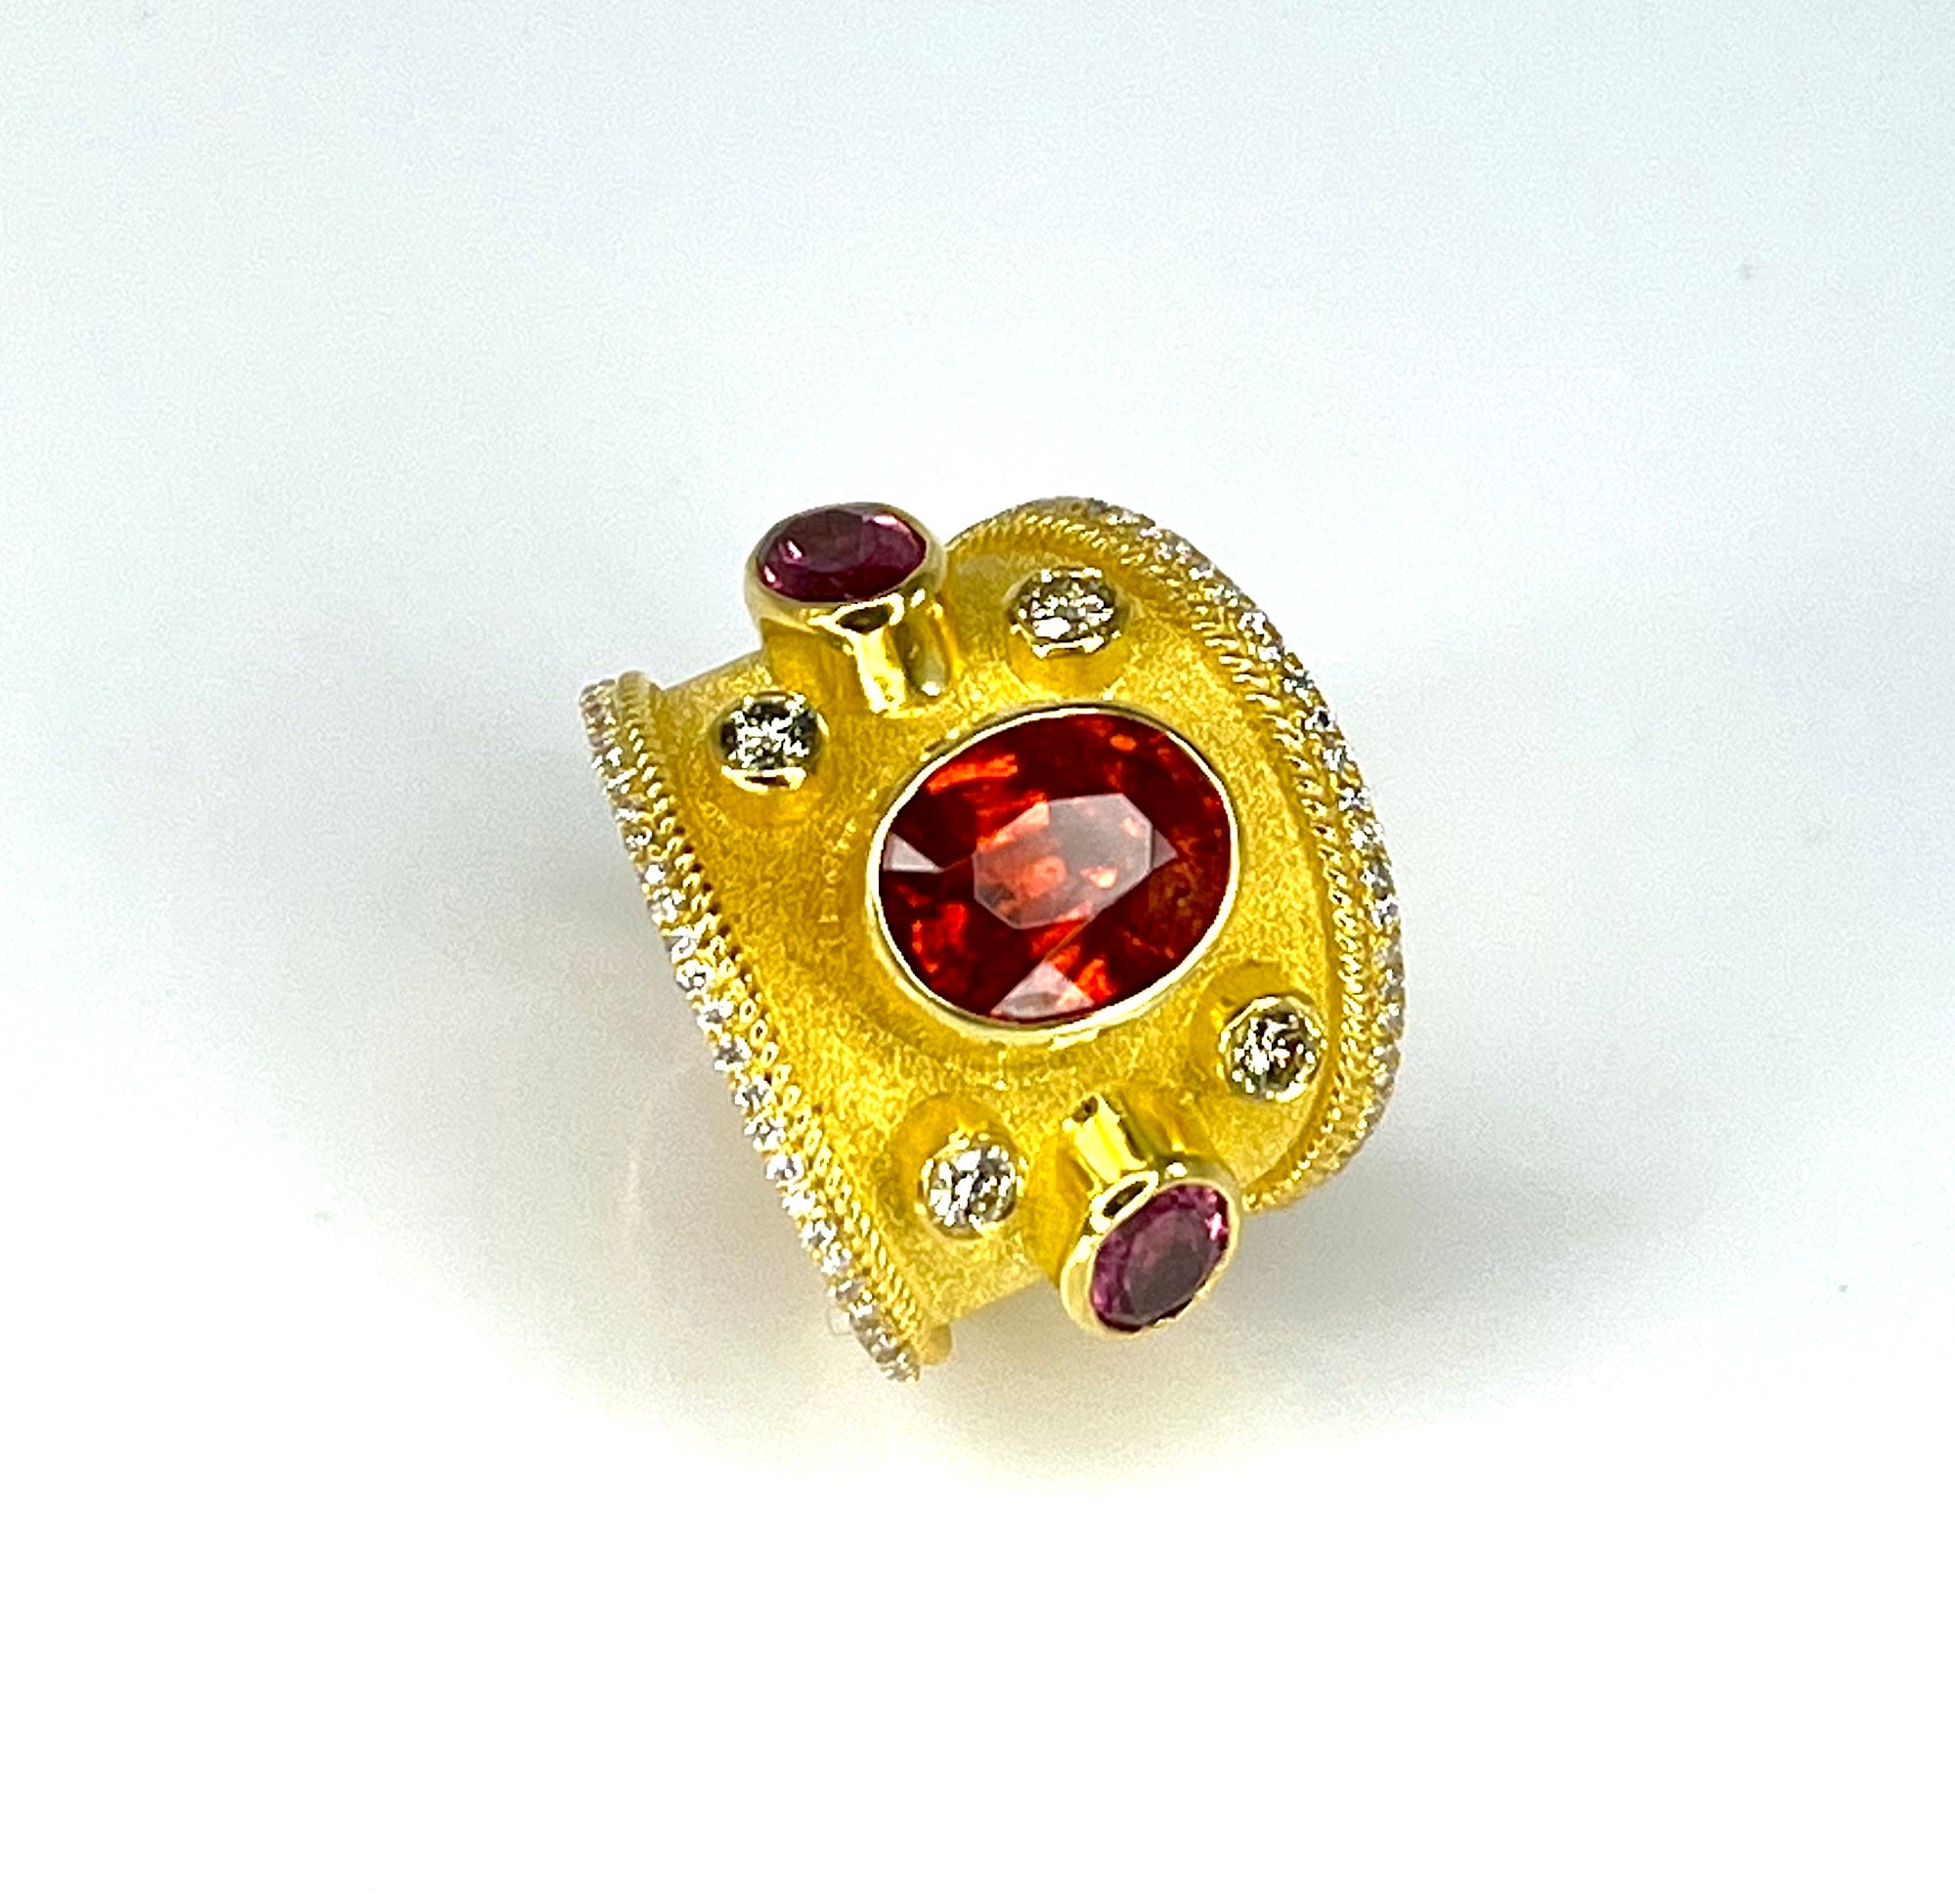 Admiring S.Georgios designer 18 Karat Solid Yellow Gold Wide Ring all handmade in Byzantine style with a stunning unique velvet background and twisted wires. This gorgeous ring features an oval cut 1.30 Carat Mexican Fire Opal center and two oval